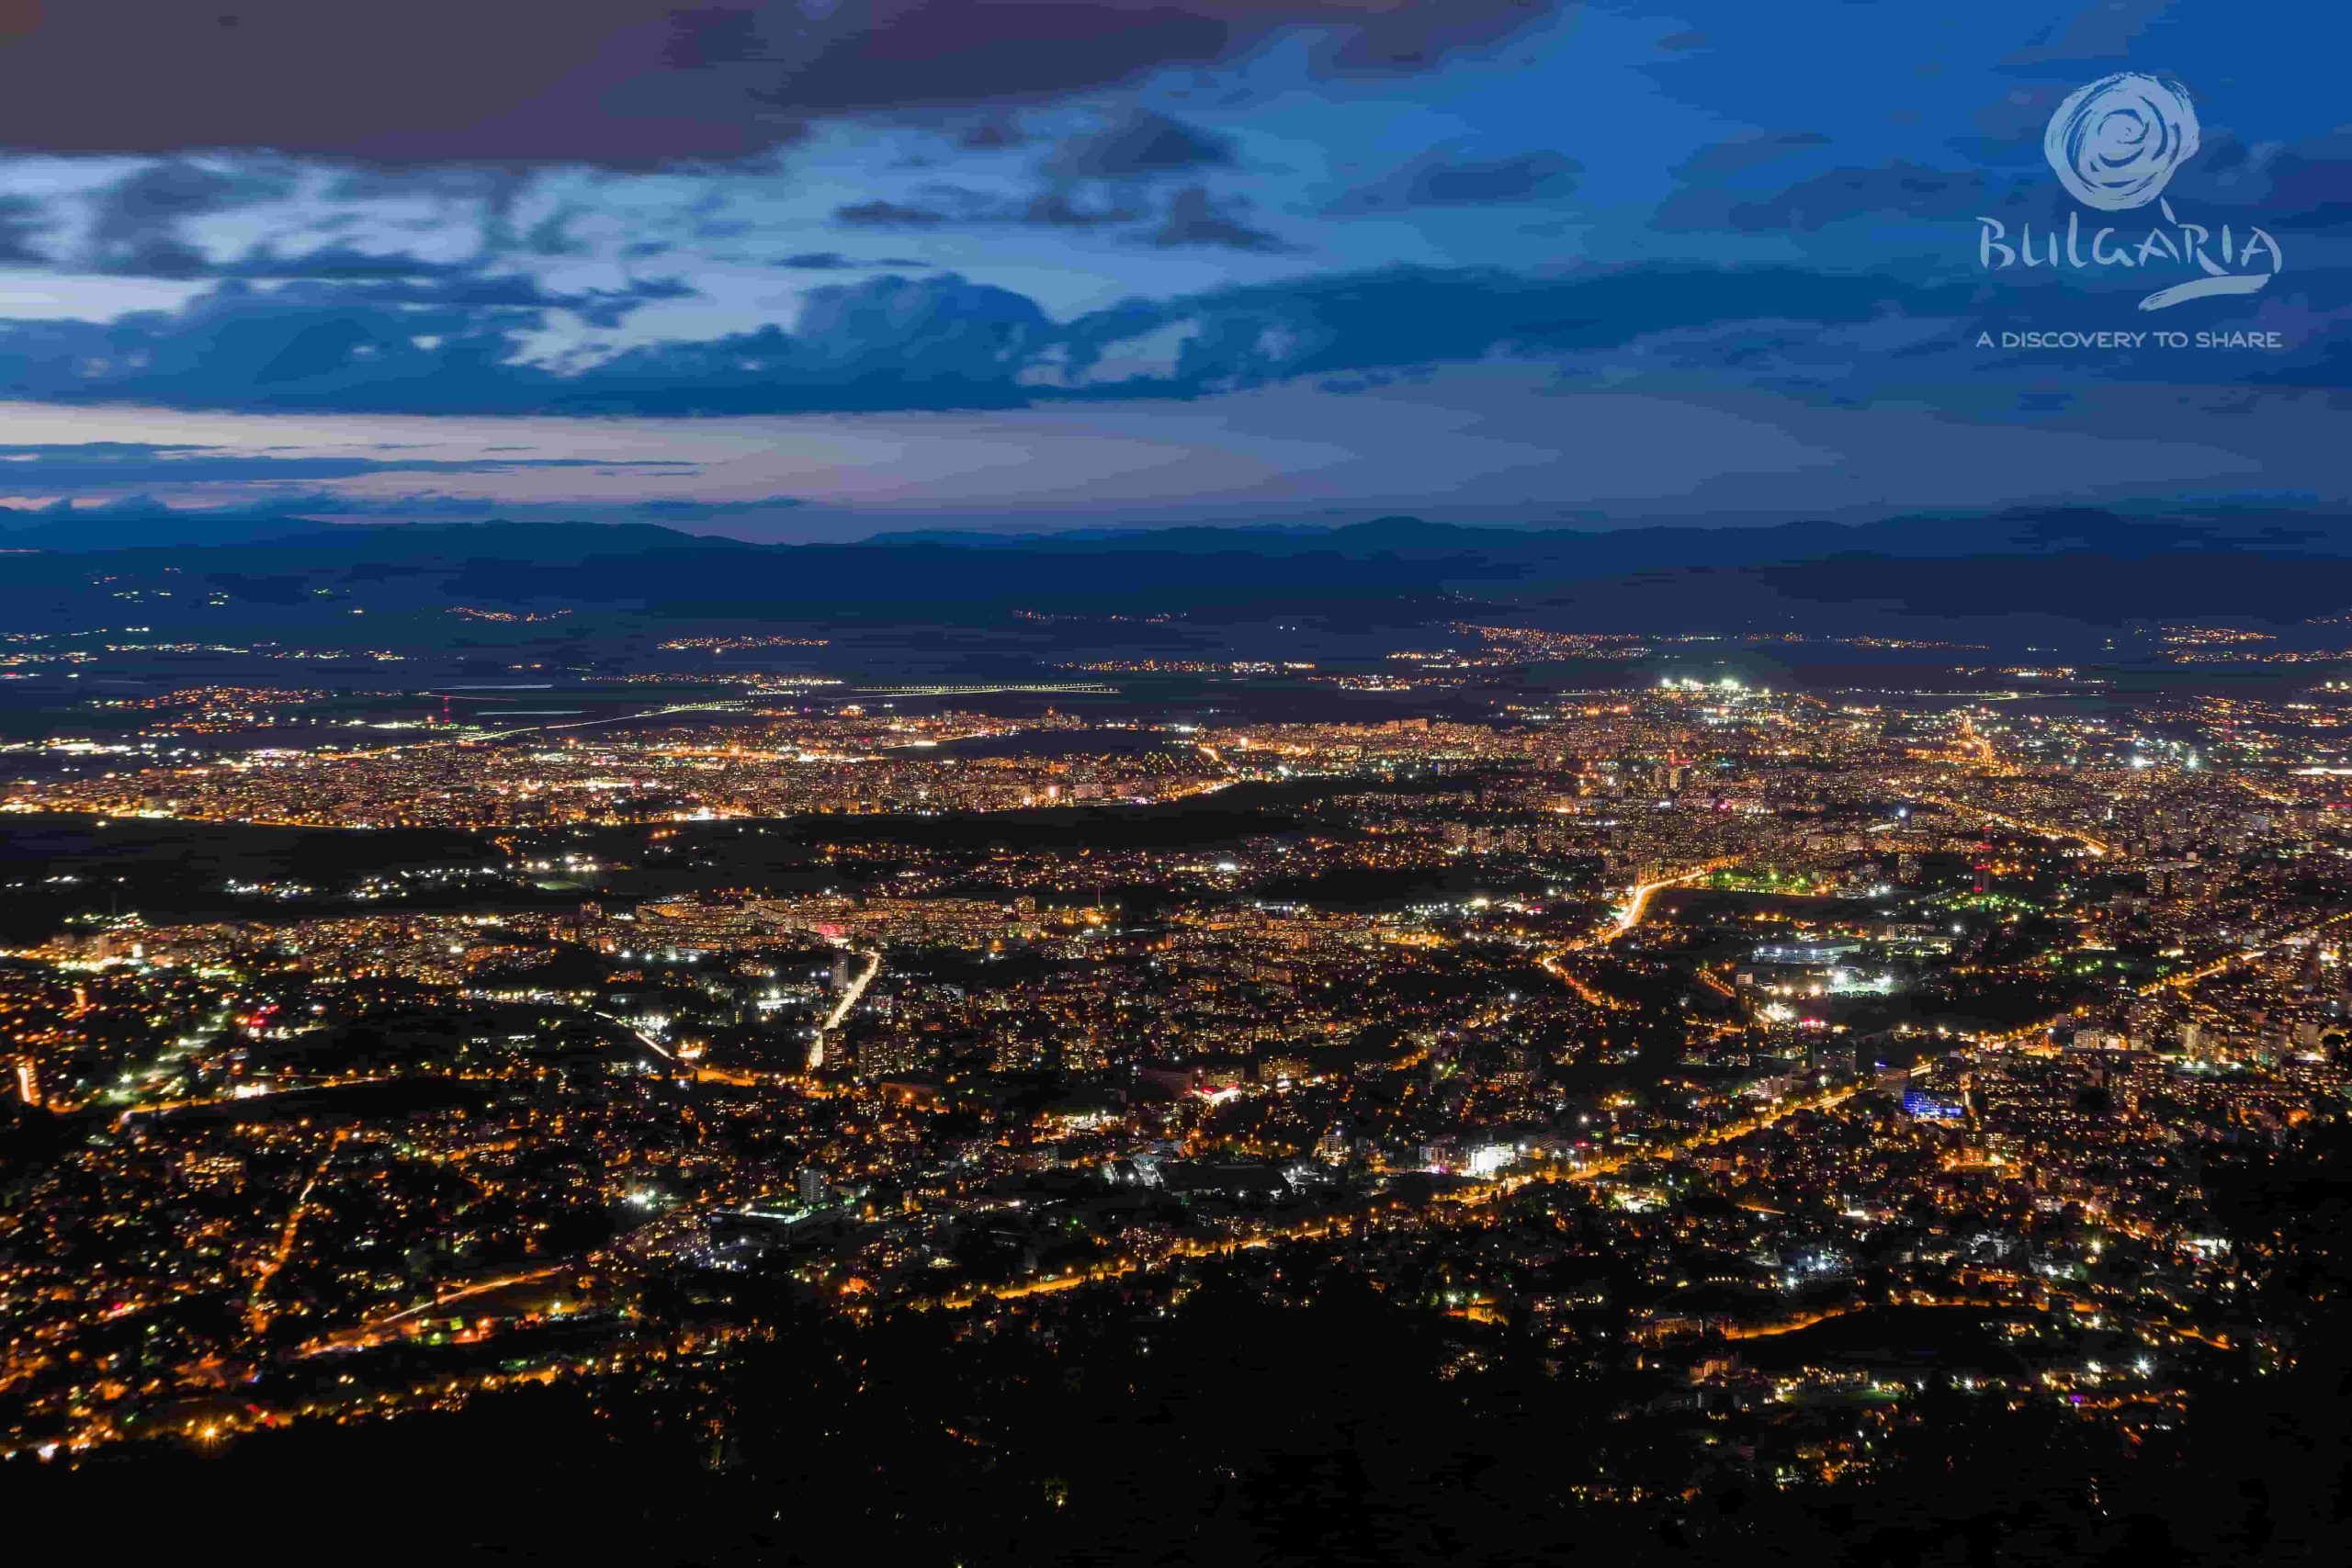 A breathtaking night view of the city, captured from a mountain peak. The city lights twinkle below, creating a mesmerizing sight.